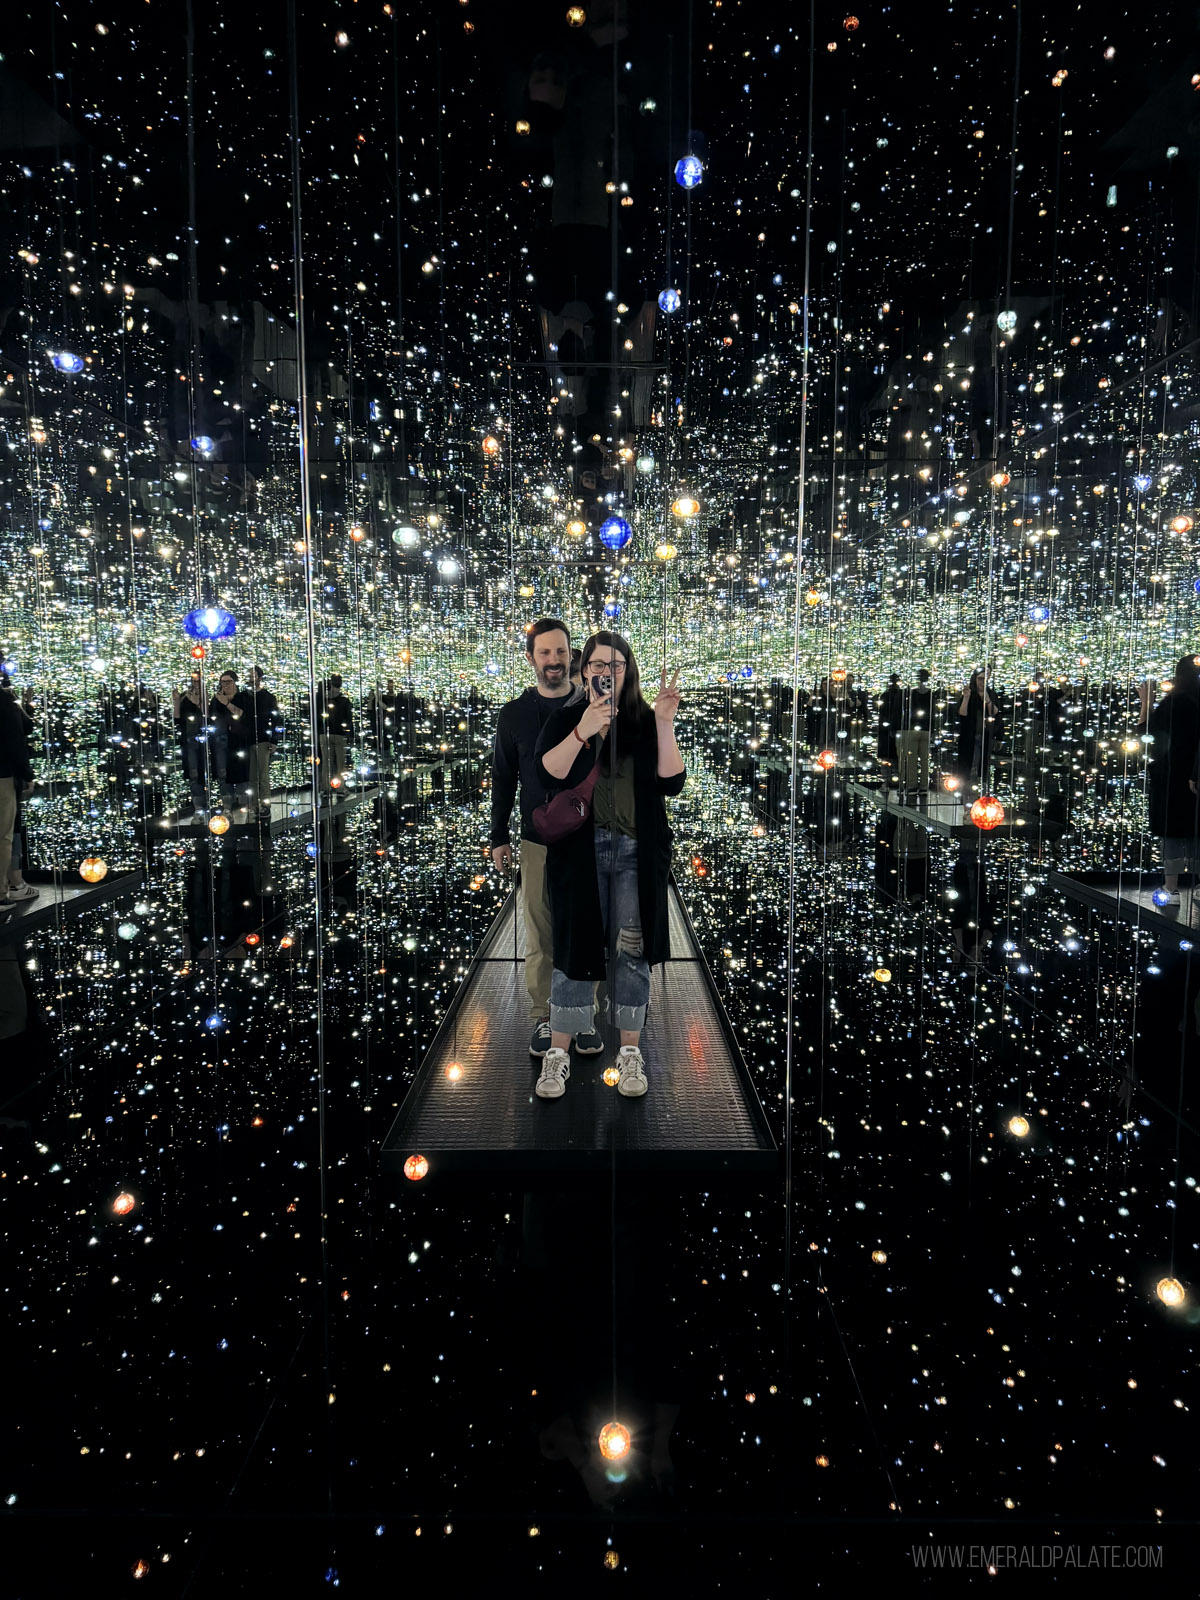 Infinity Mirrors Room at The Broad museum in LA